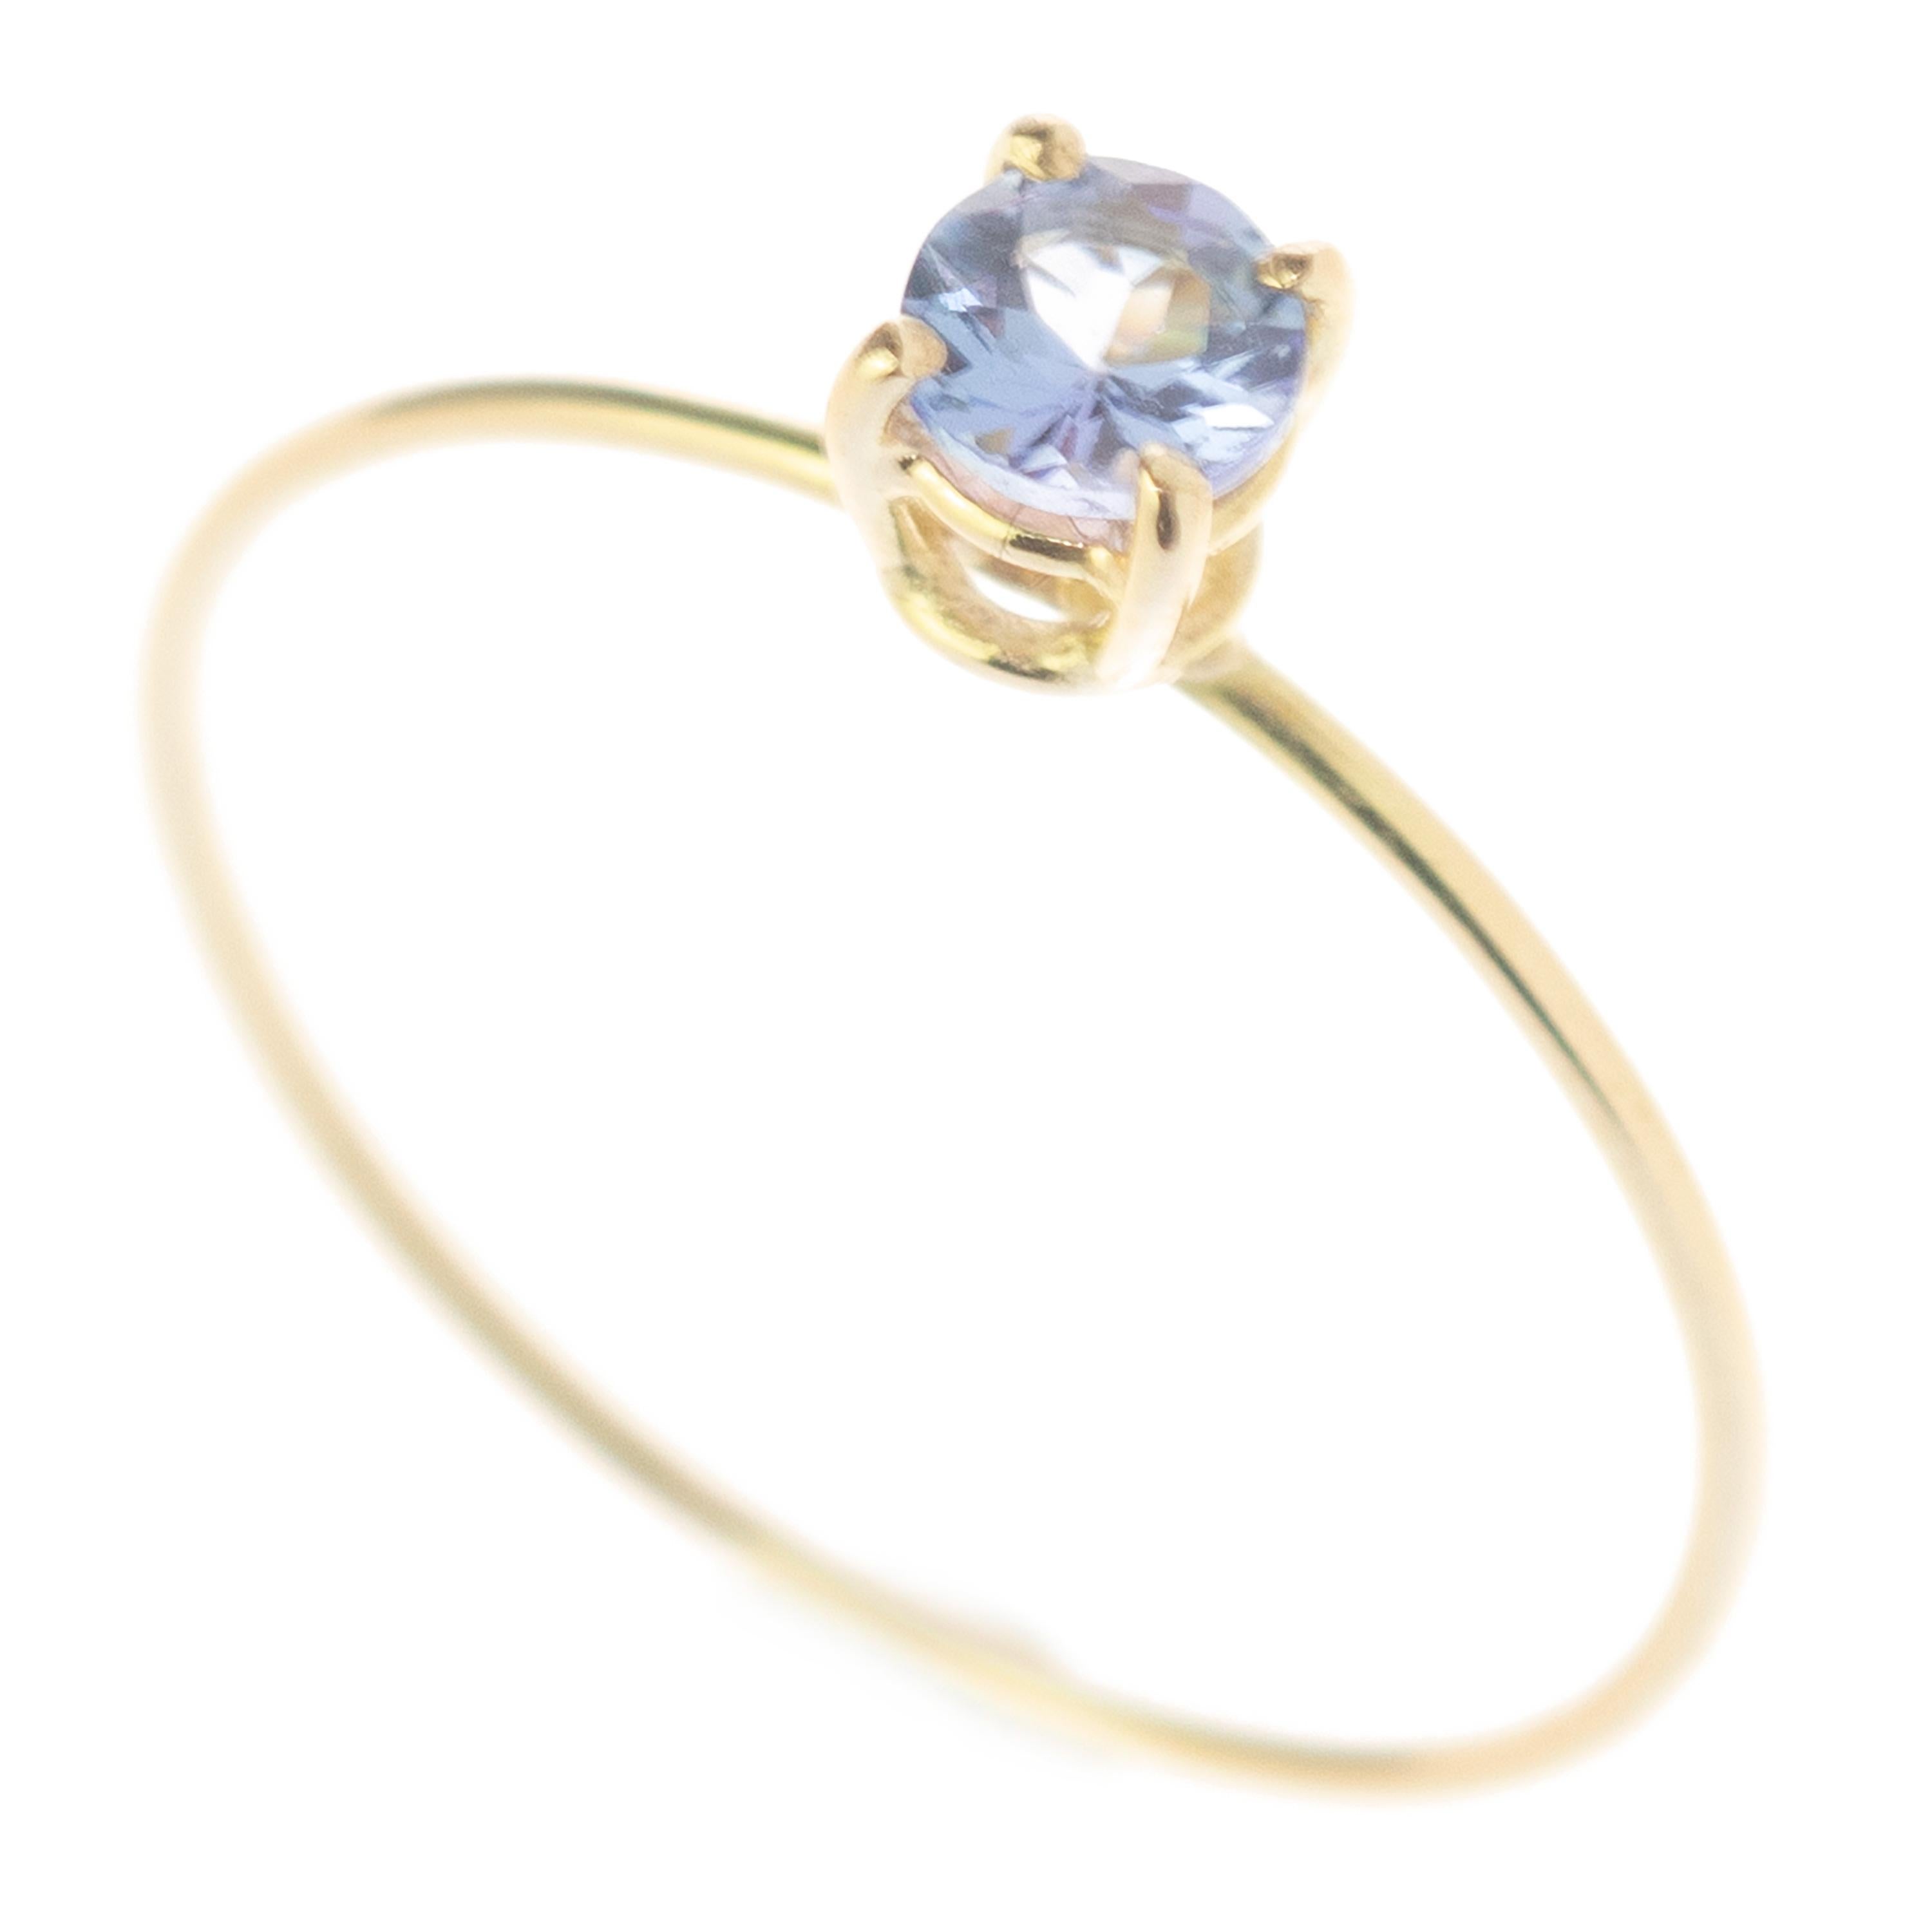 Signature INTINI Jewels clear blue tanzanite jewellery. Modern and elegant ring design in 18k yellow gold with an brilliant cut with tiny griffes sormounting the ring.

This gorgeous blue-purple gemstone is linked to various positive and mystical